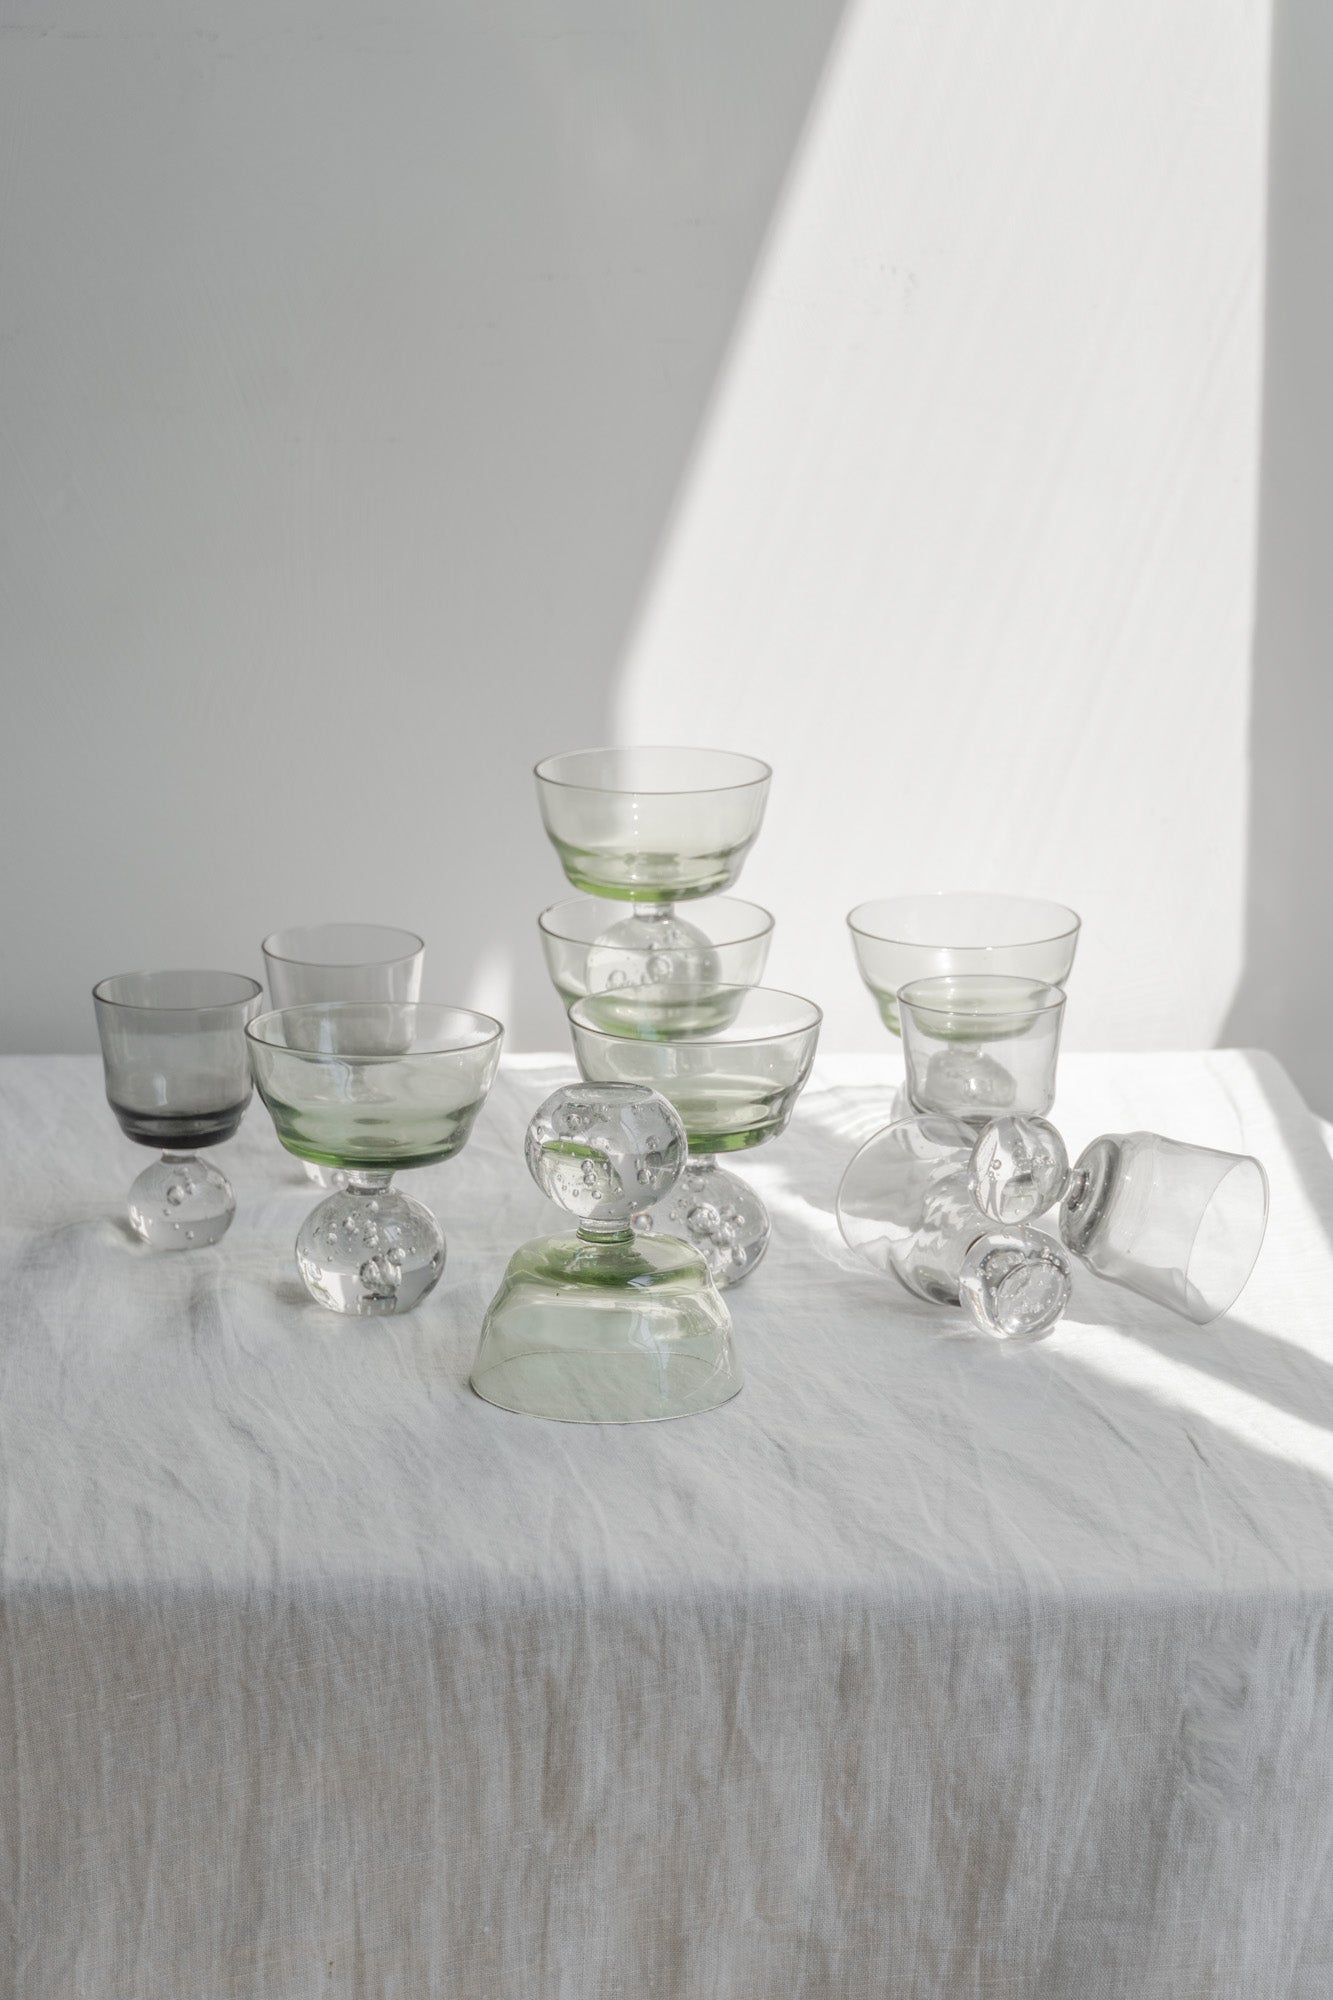 Serax Collection of the Stem Glass in Green Eternal and Smoke